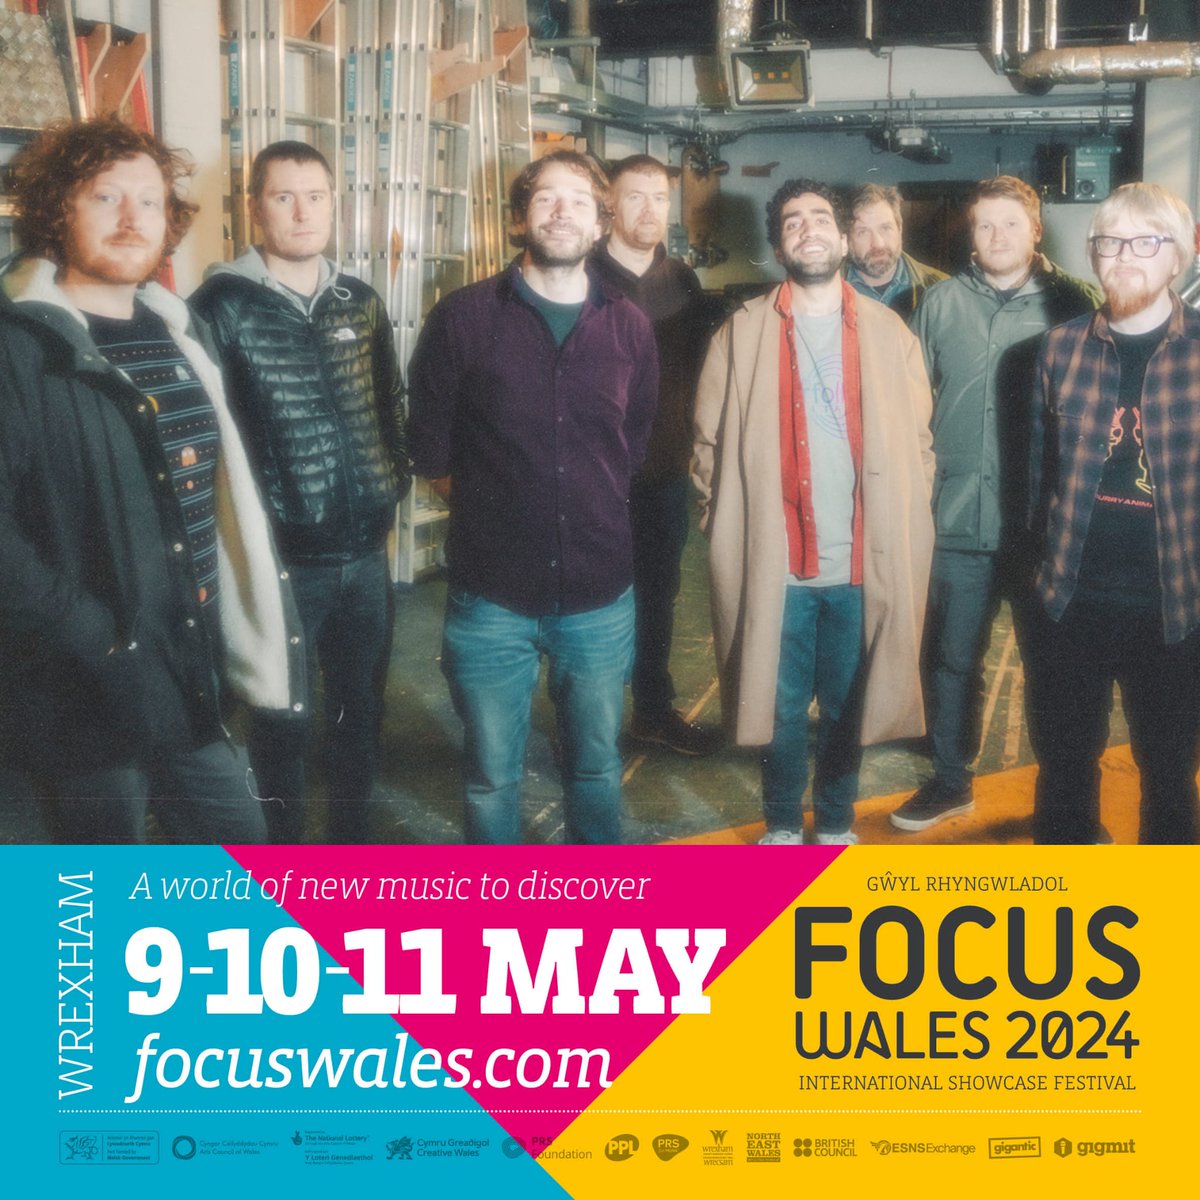 🚨🚨🚨 Lash detectives assemble 🚨🚨🚨 We have detected a lash in Wrexham on 9-10-11 May @FocusWales Gintis will be playing at 10.40 on the Friday night in the Wynnstay arms Xx